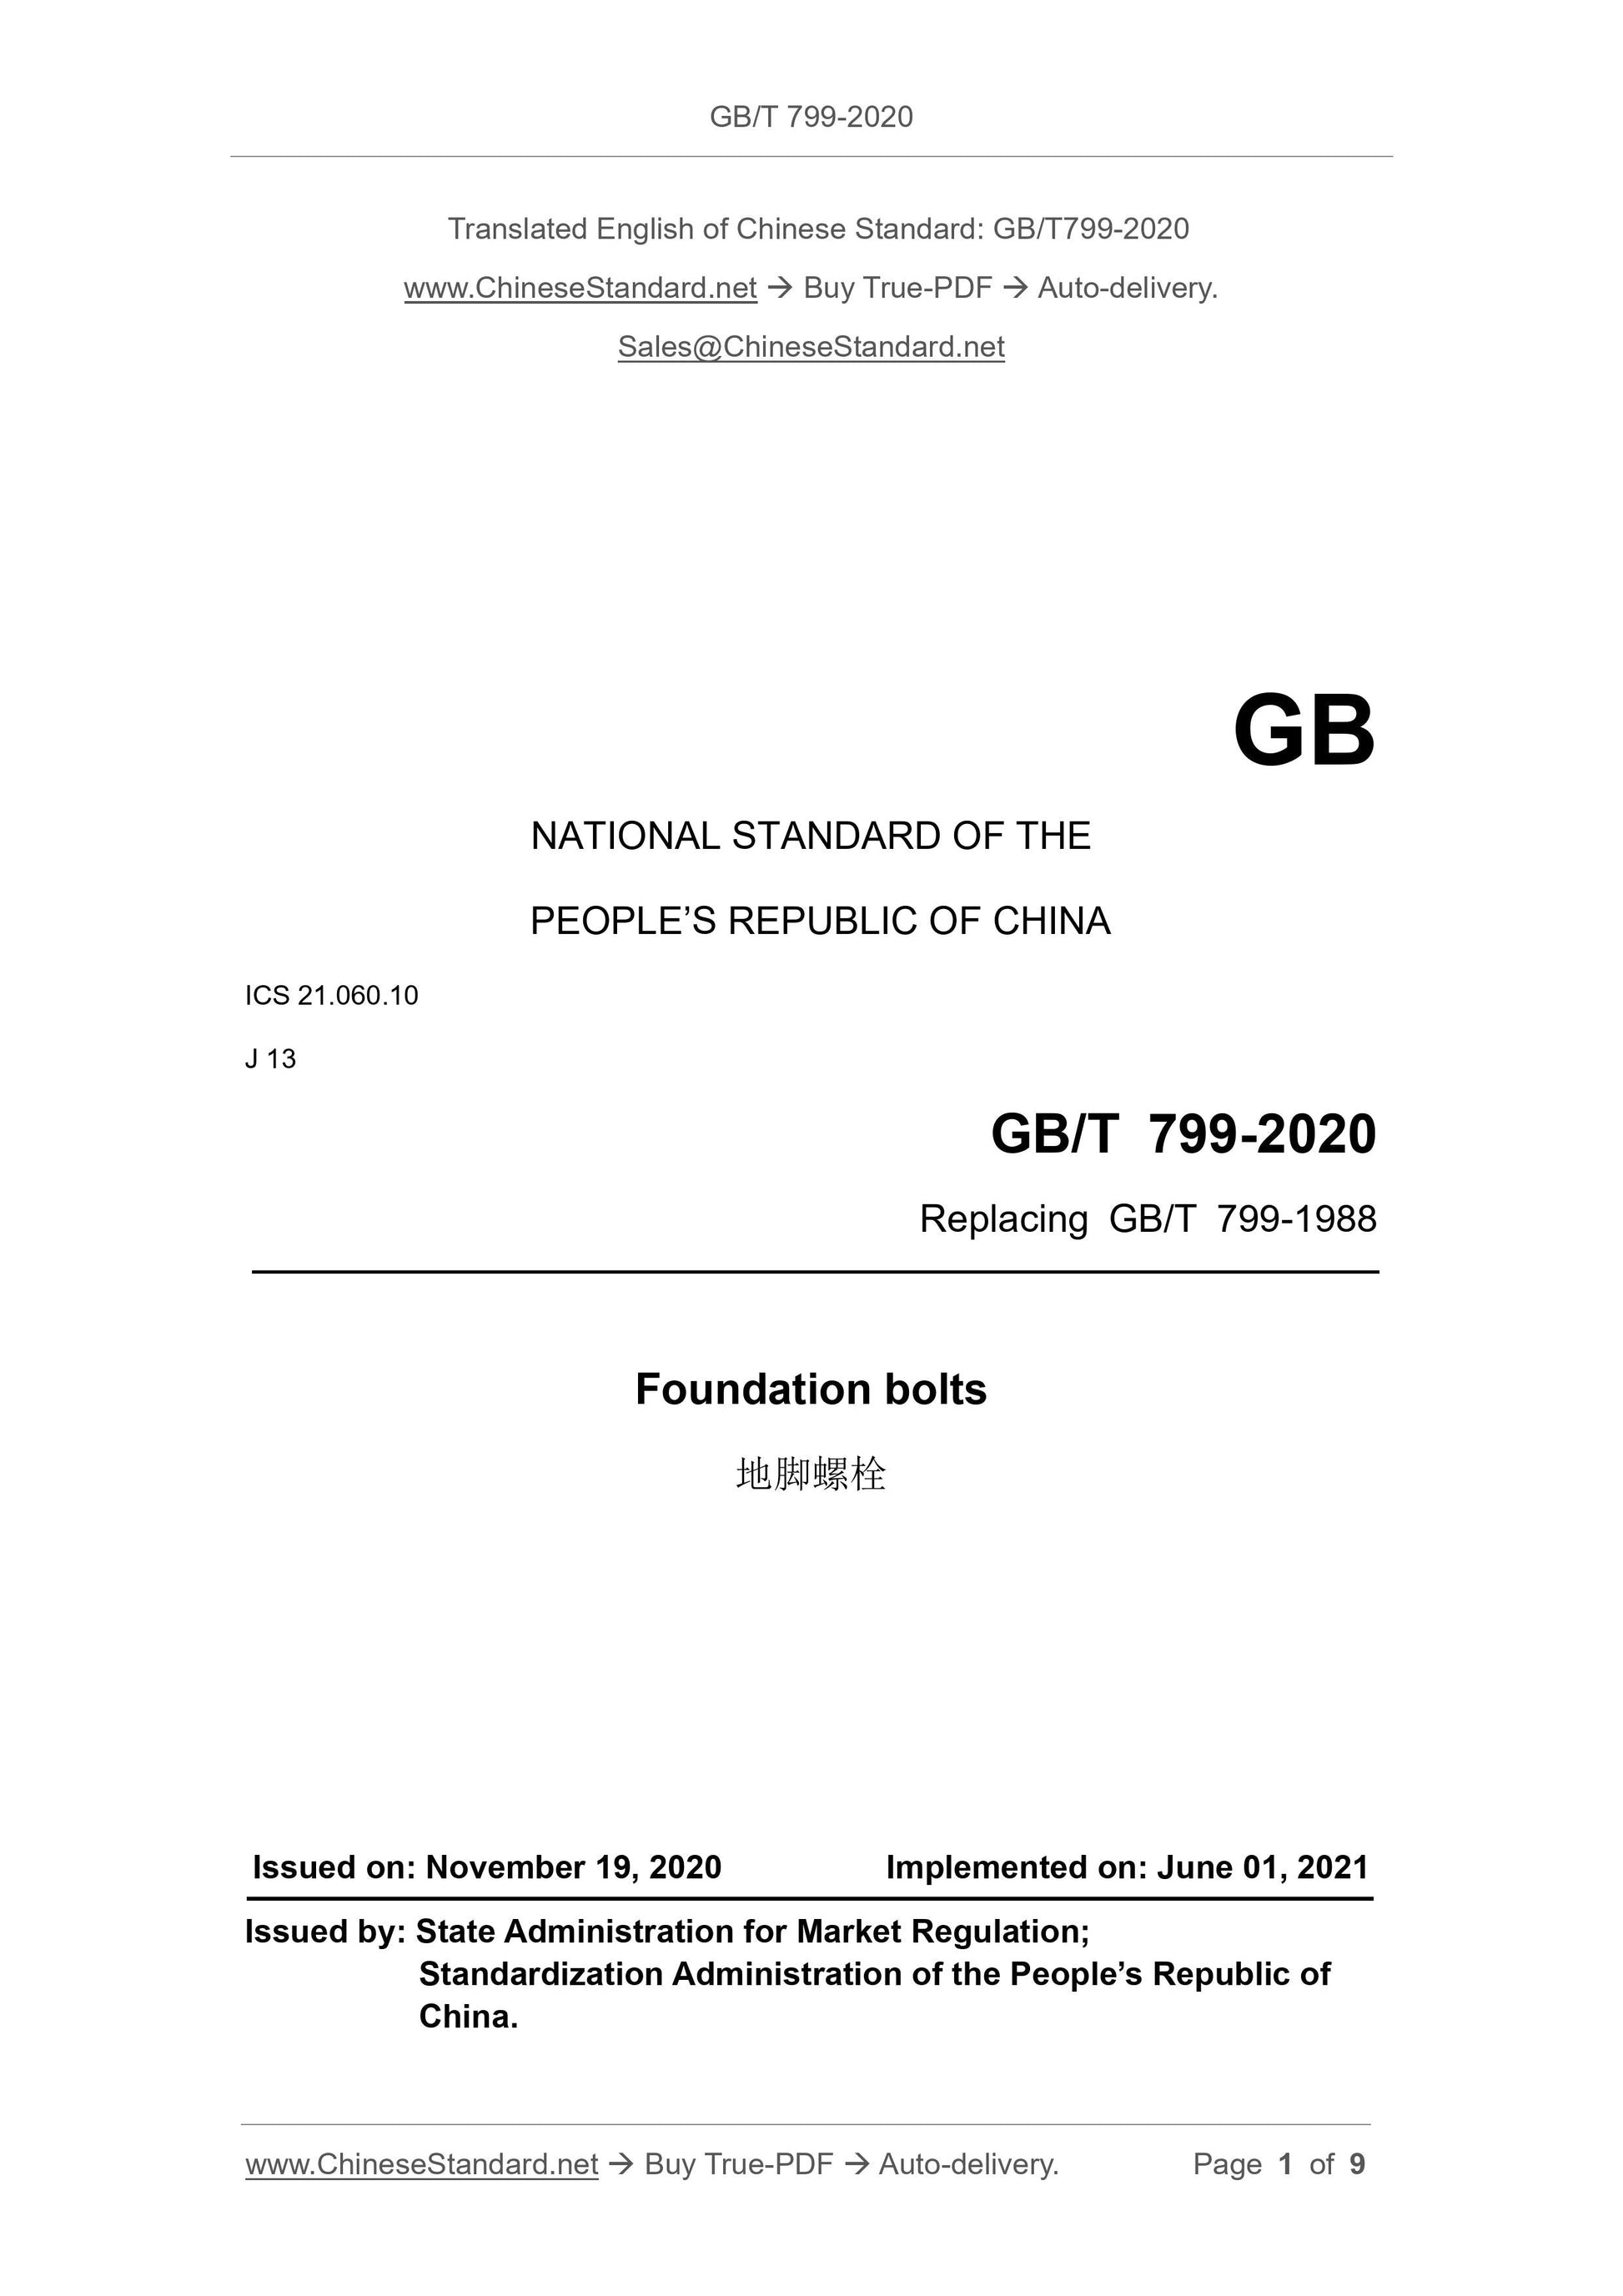 GB/T 799-2020 Page 1